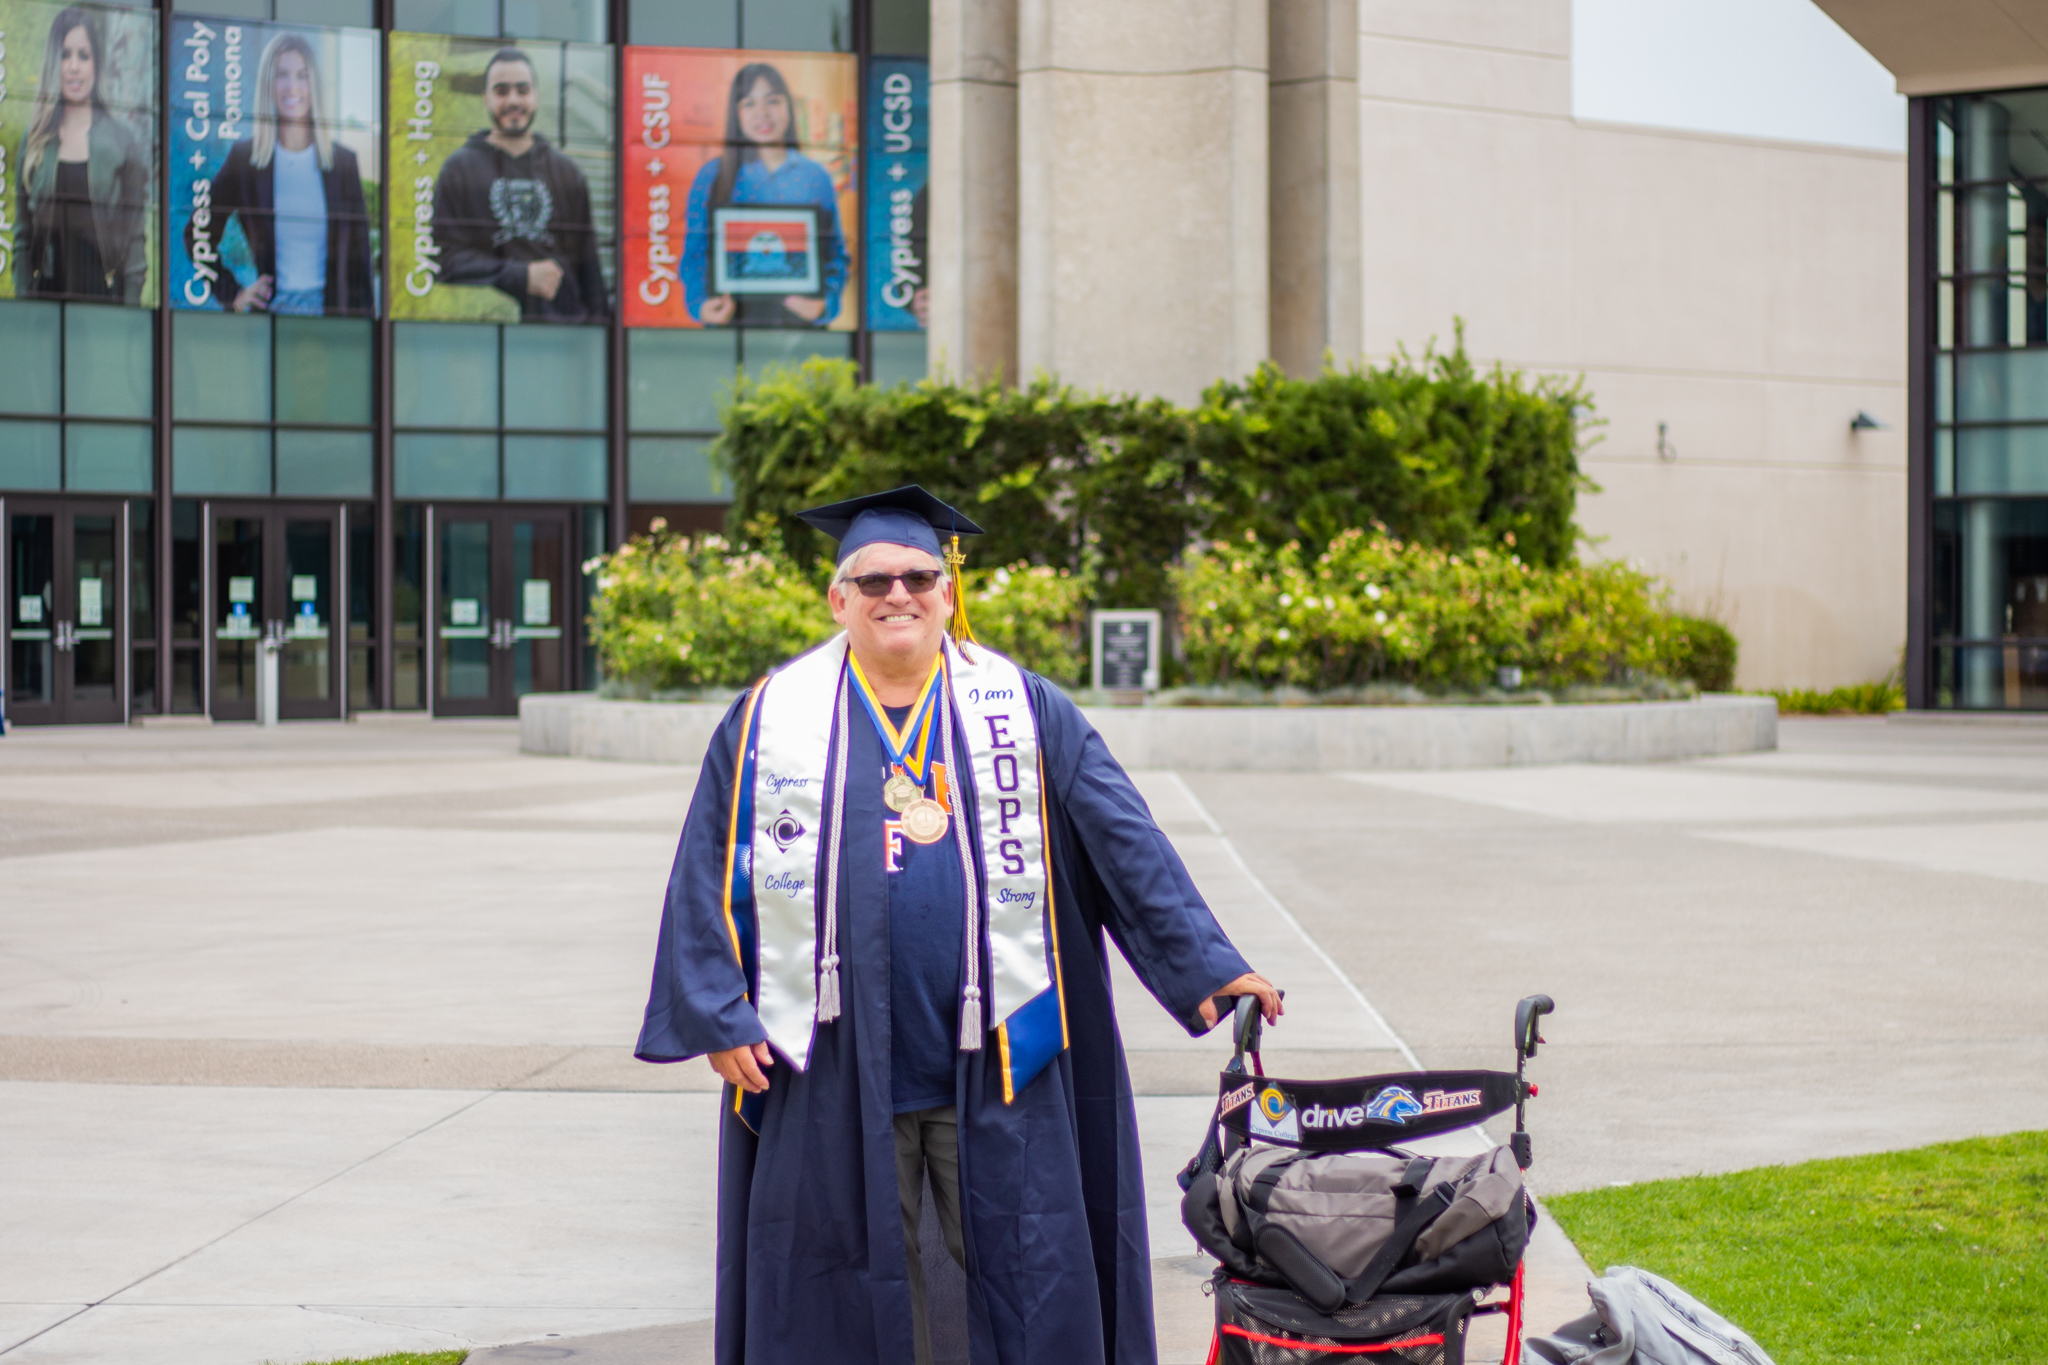 Patrick Hale poses in front of Cypress College Student Life and Leadership building with his graduation regalia and walker.